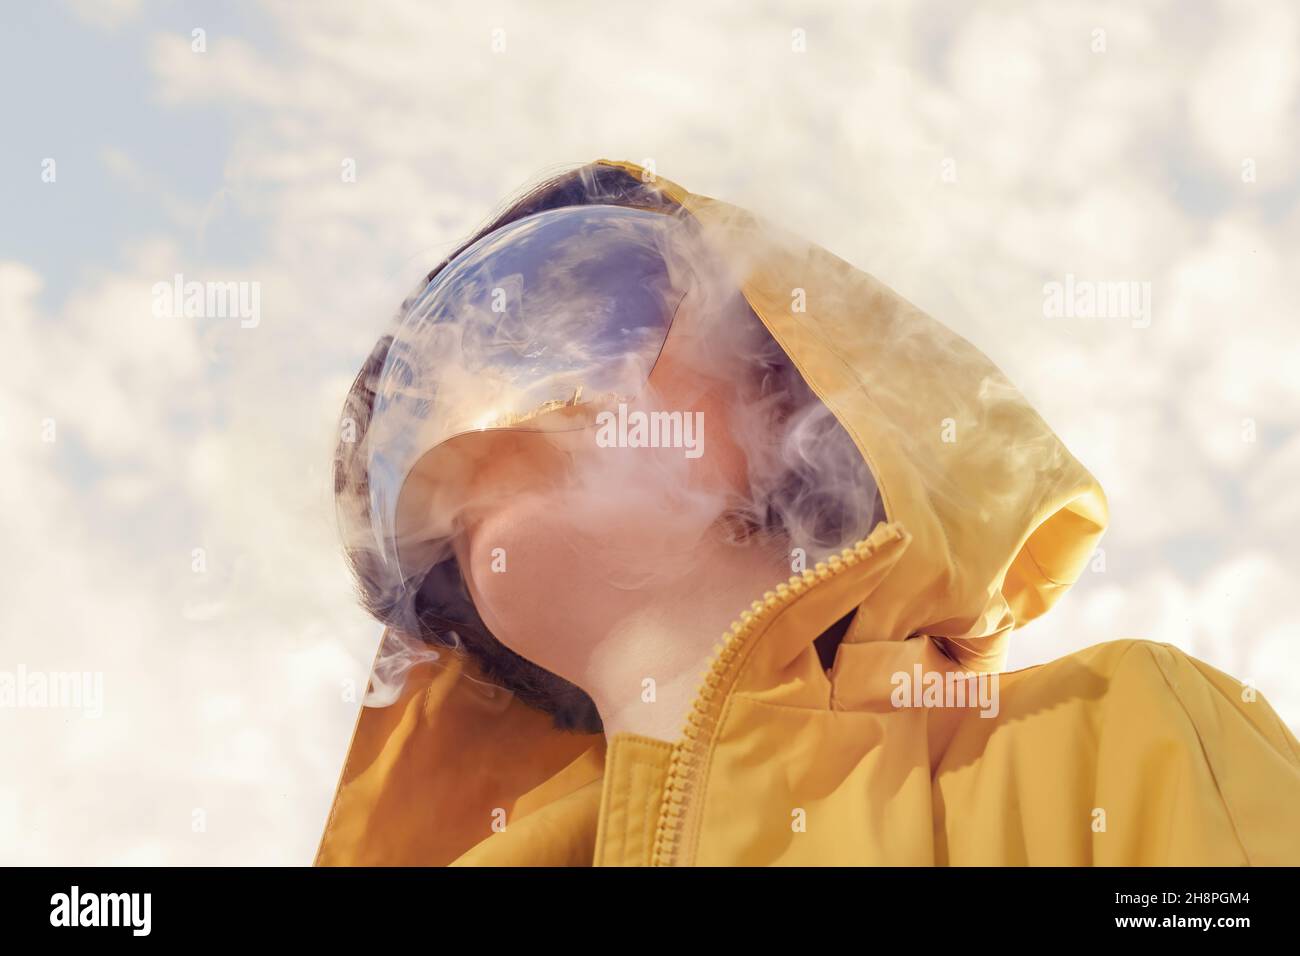 A girl in a yellow raincoat, a mirror mask covering her face and a reflection of the sky in a mask. Futuristic looking surreal portrait Stock Photo